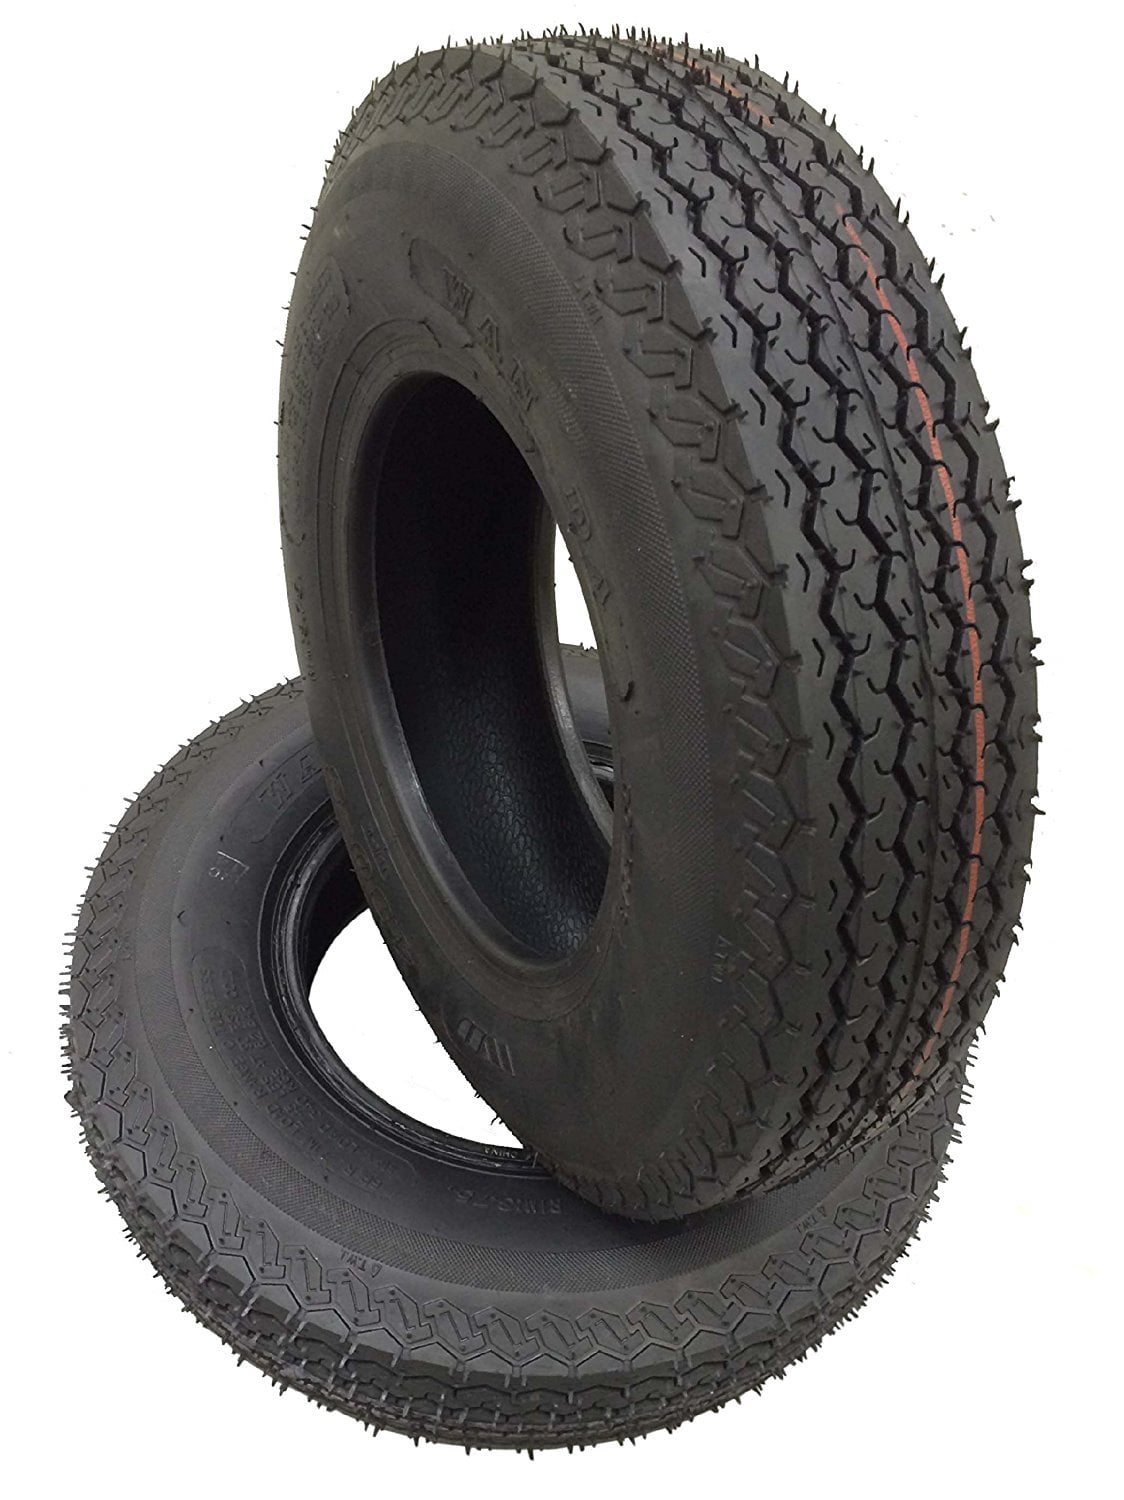 SET OF TWO 5.30-12 Wanda P811 8 Ply Tires 530 12 